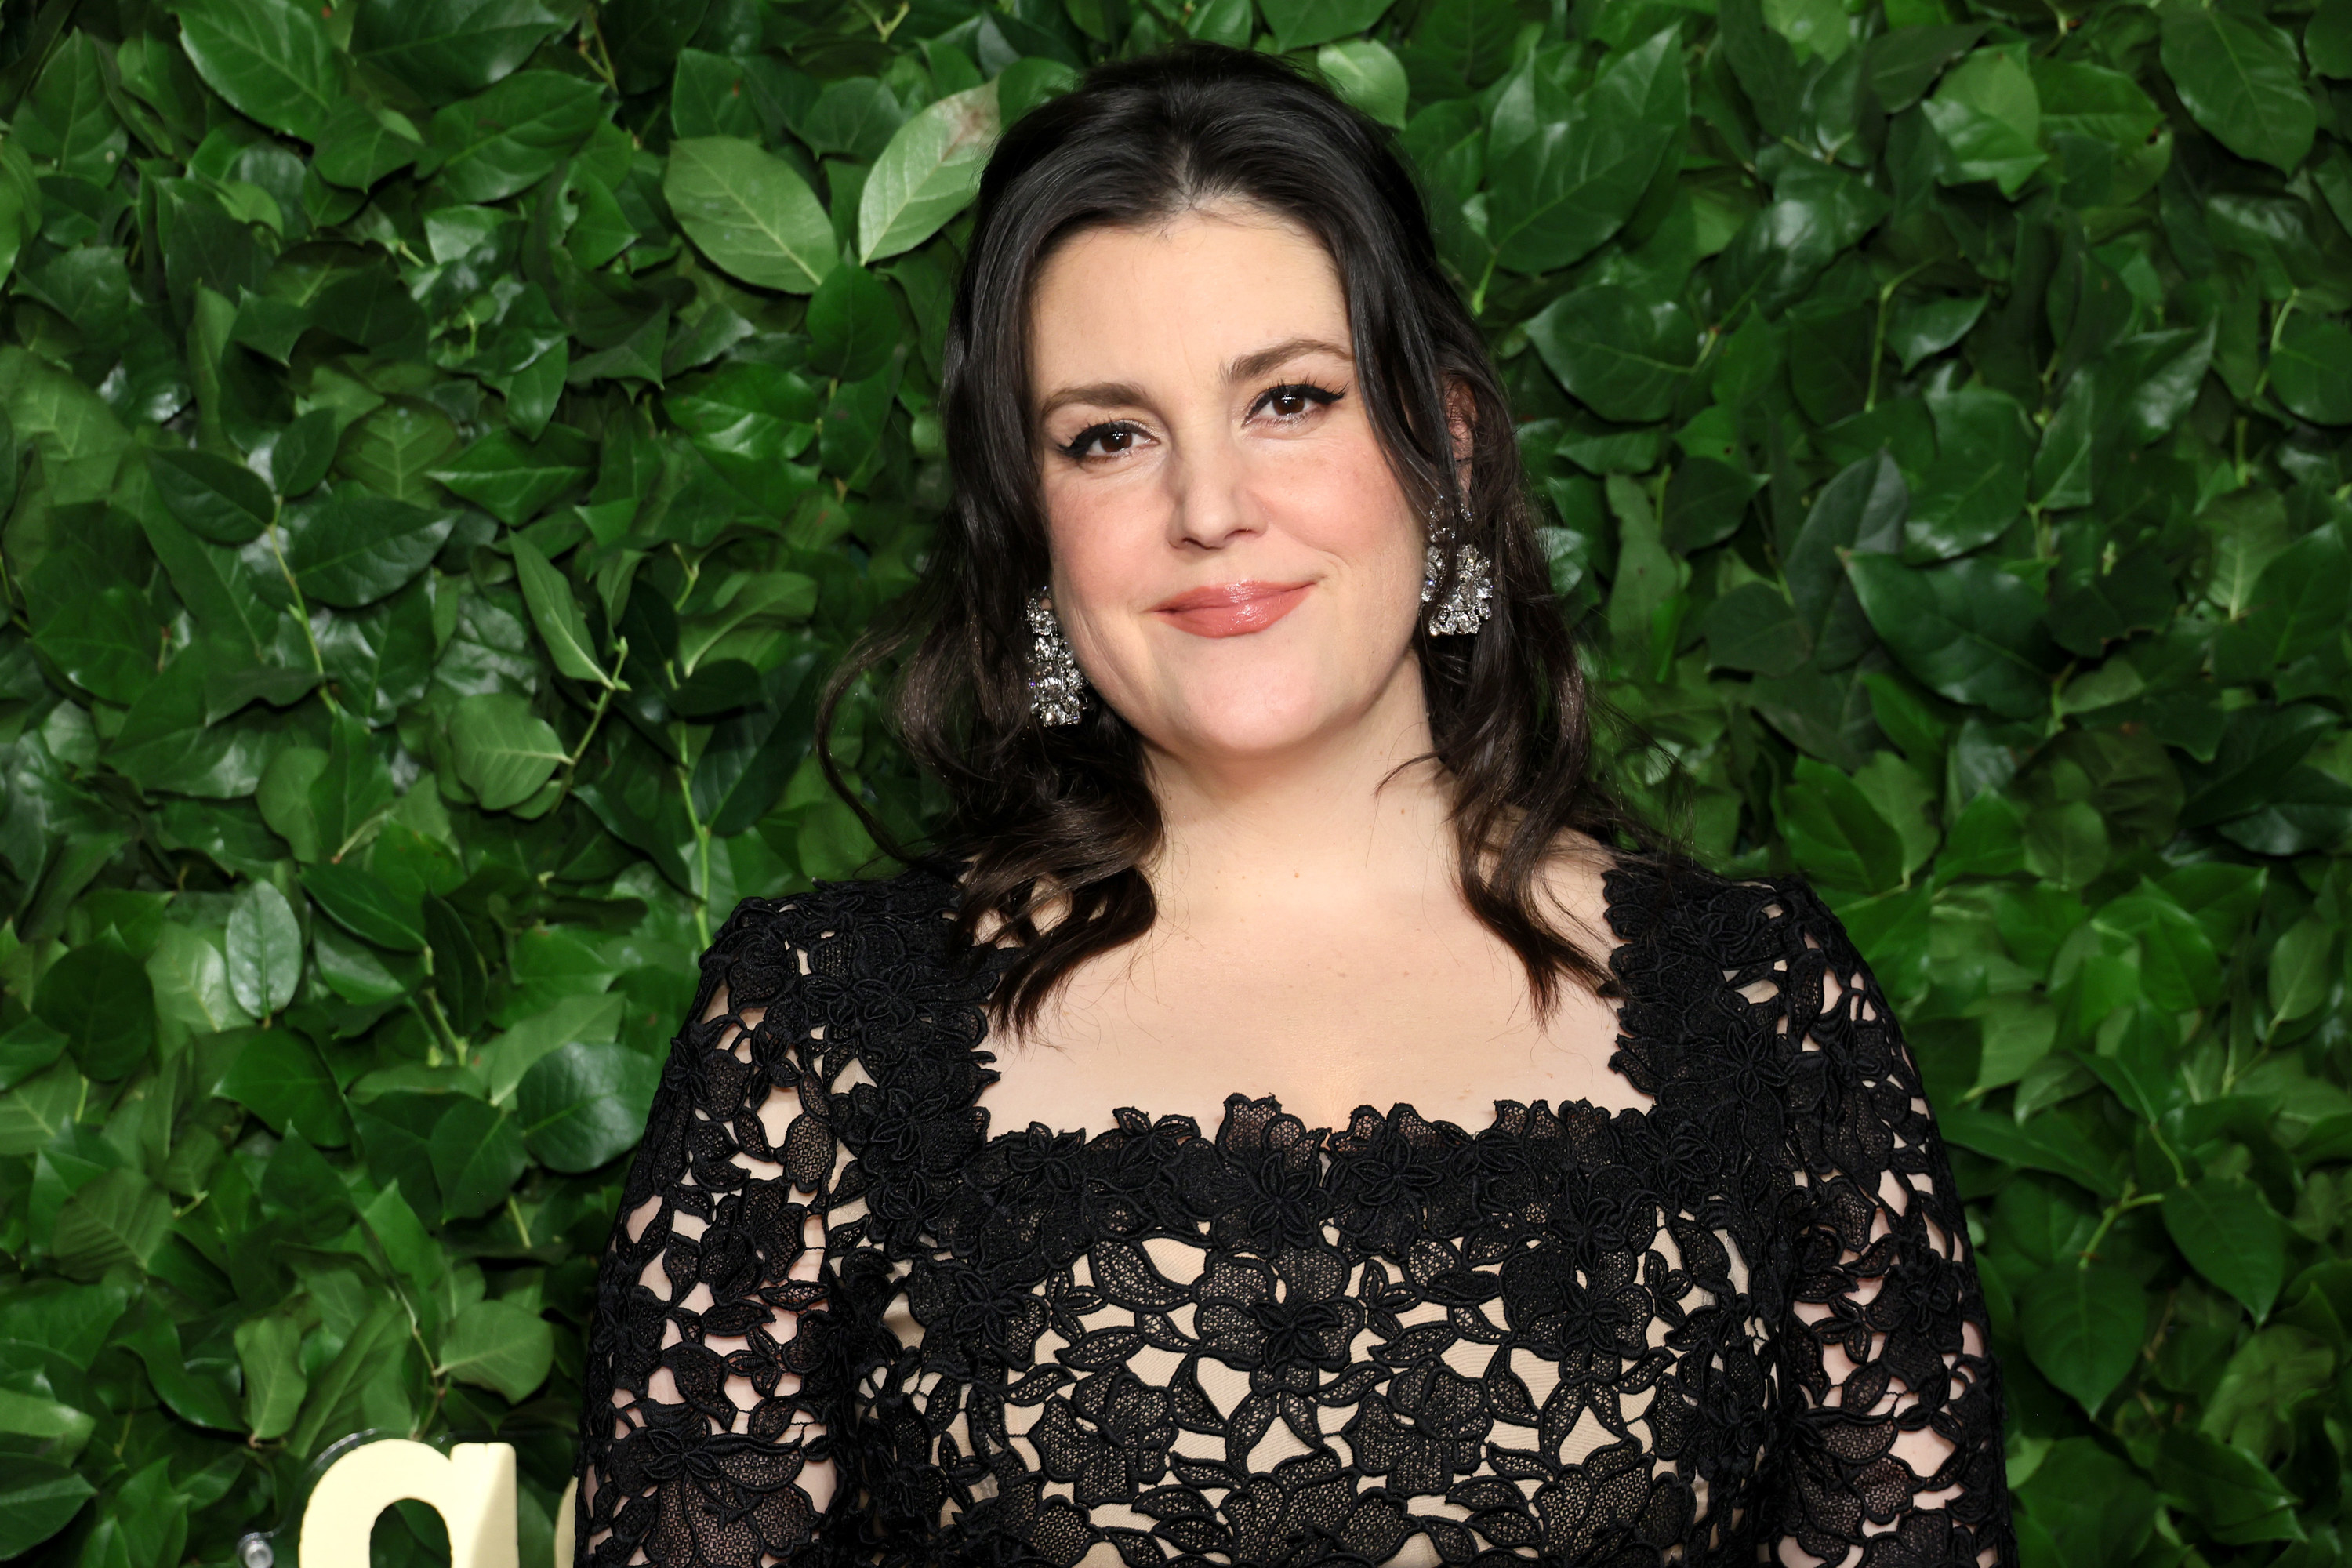 Melanie Lynskey posing for a photo in front of a wall of green leaves